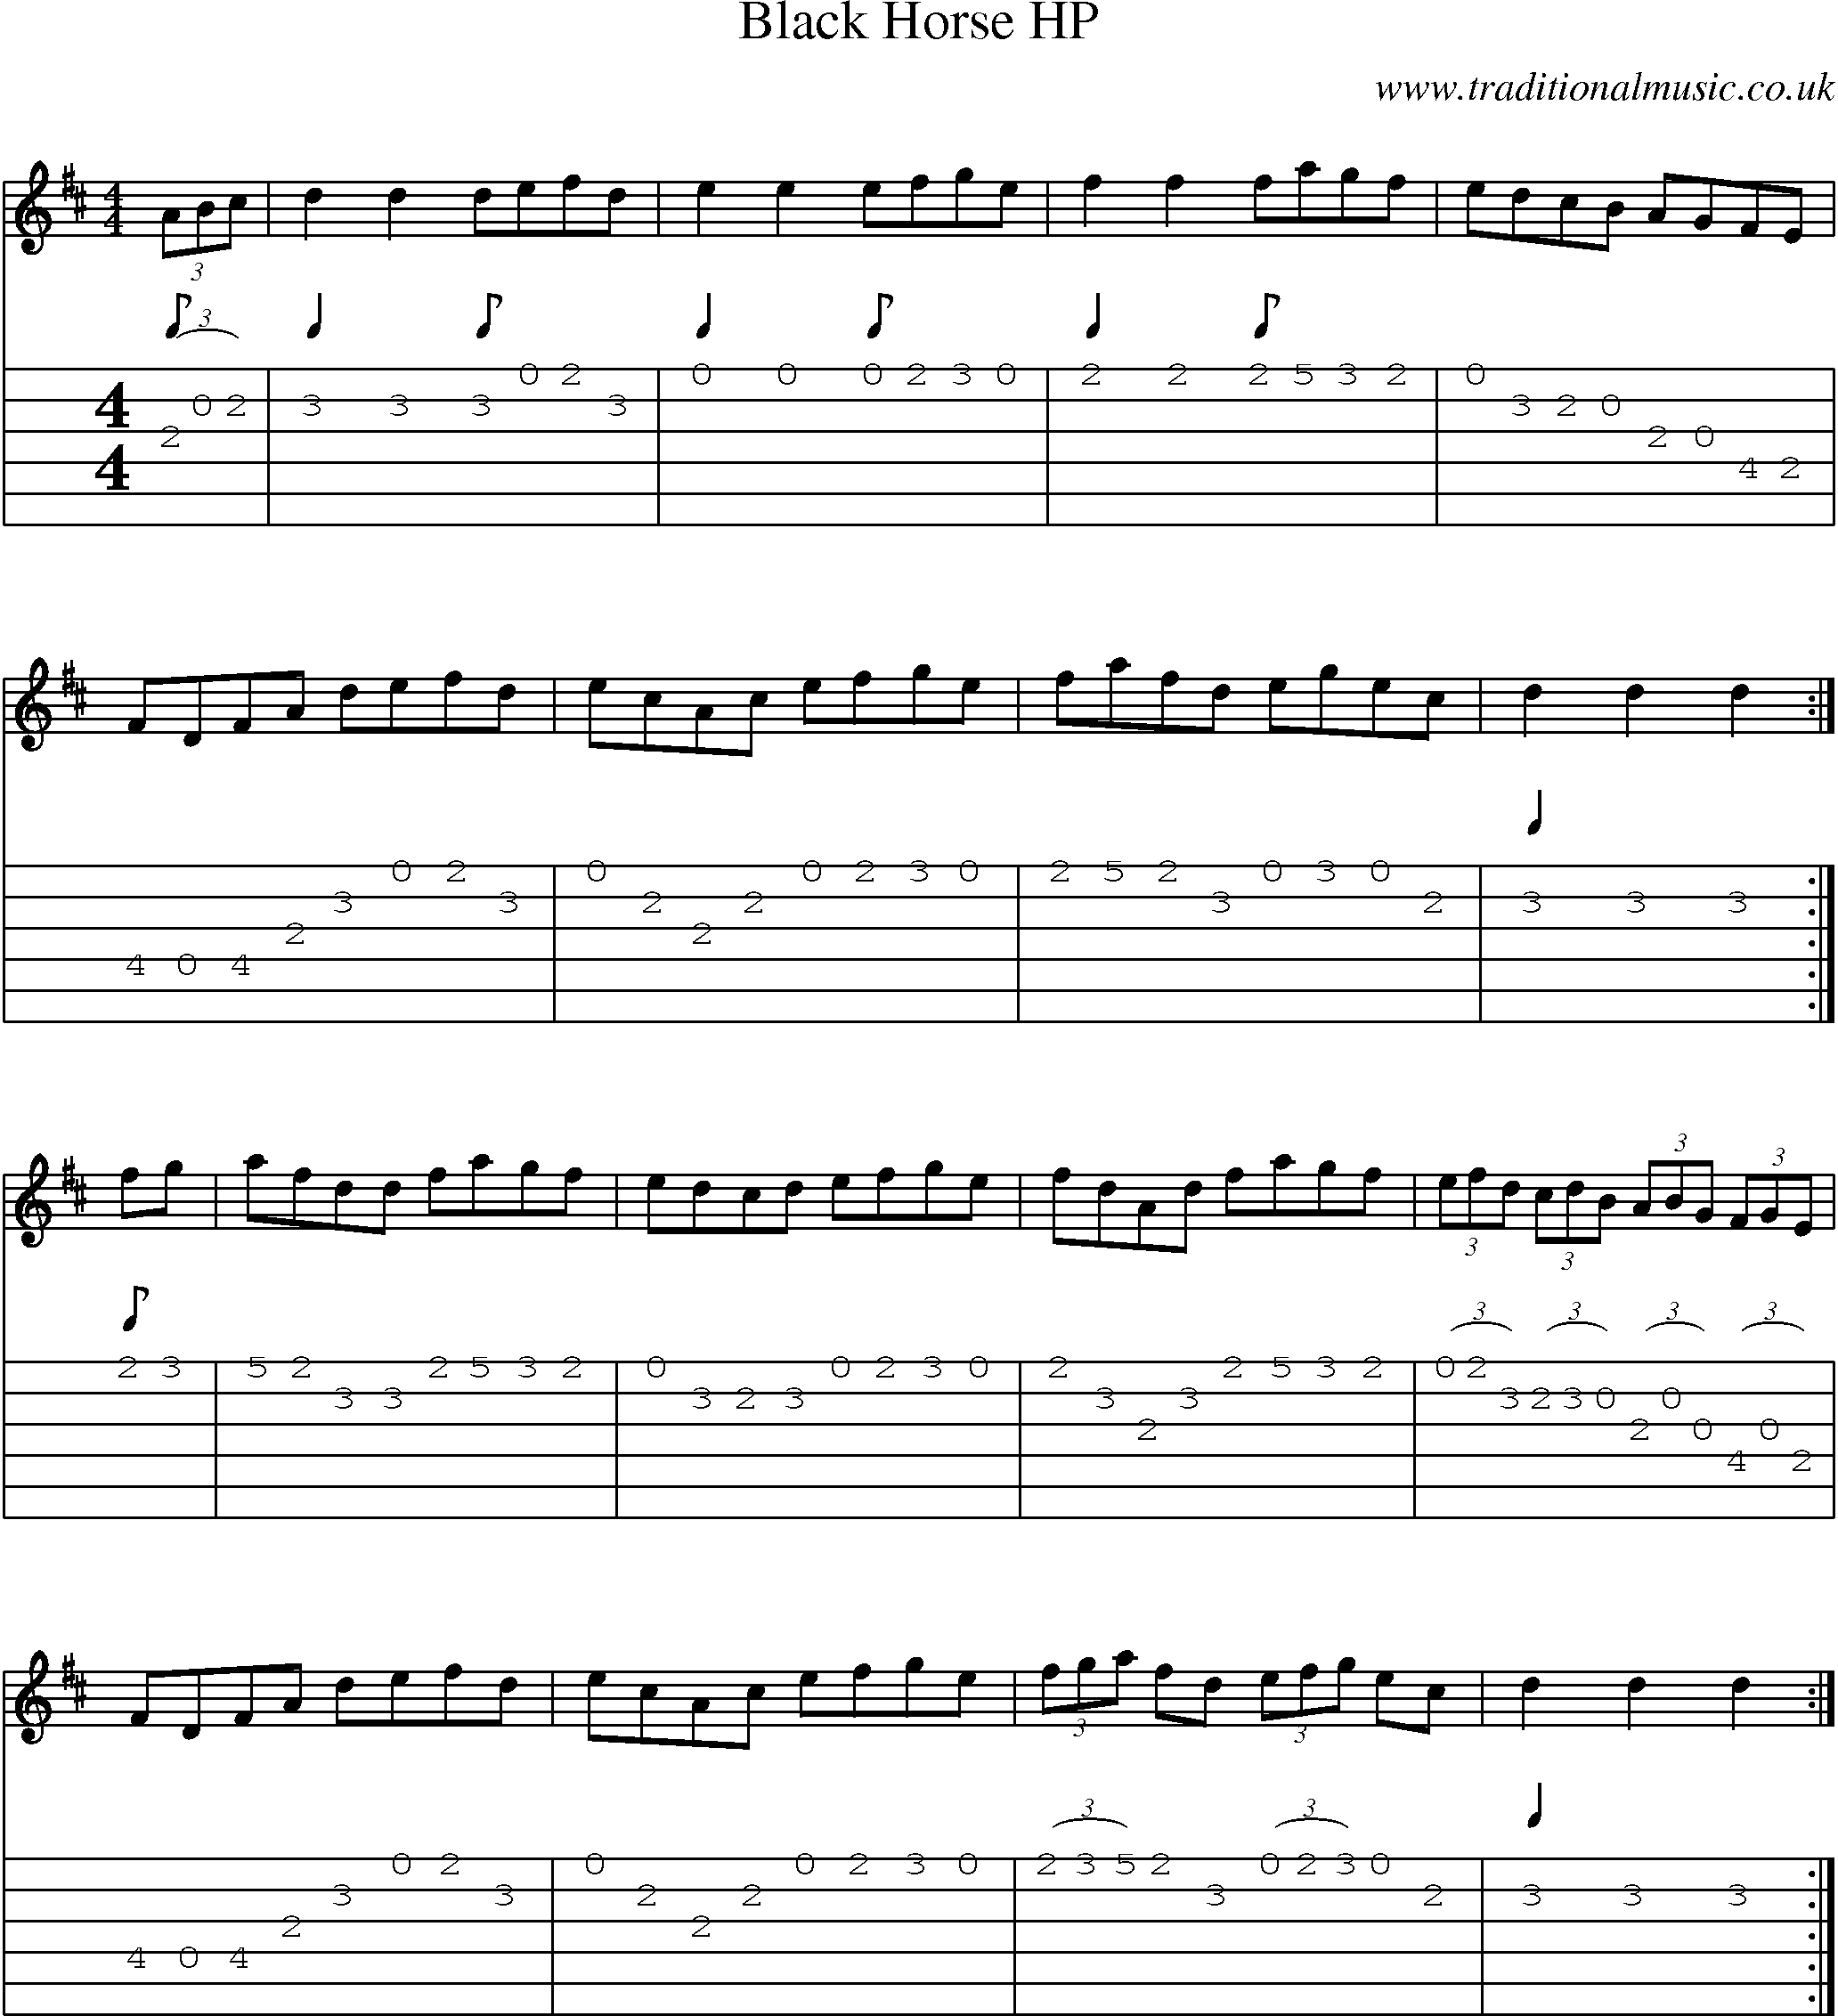 Music Score and Guitar Tabs for Black Horse